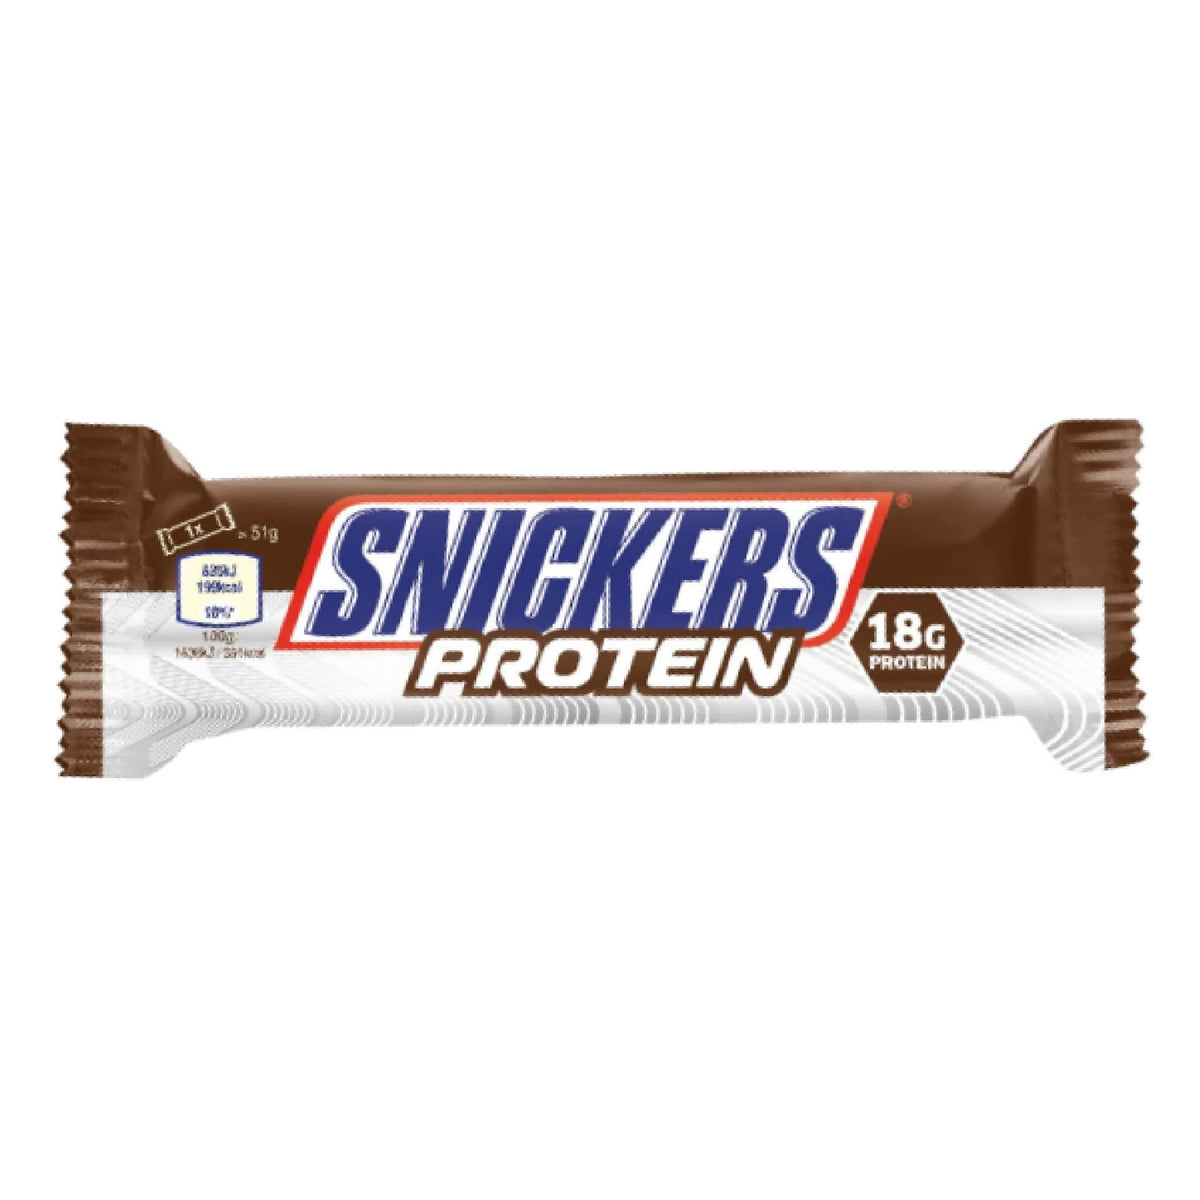 Snickers - Hi Protein Bar - 51g